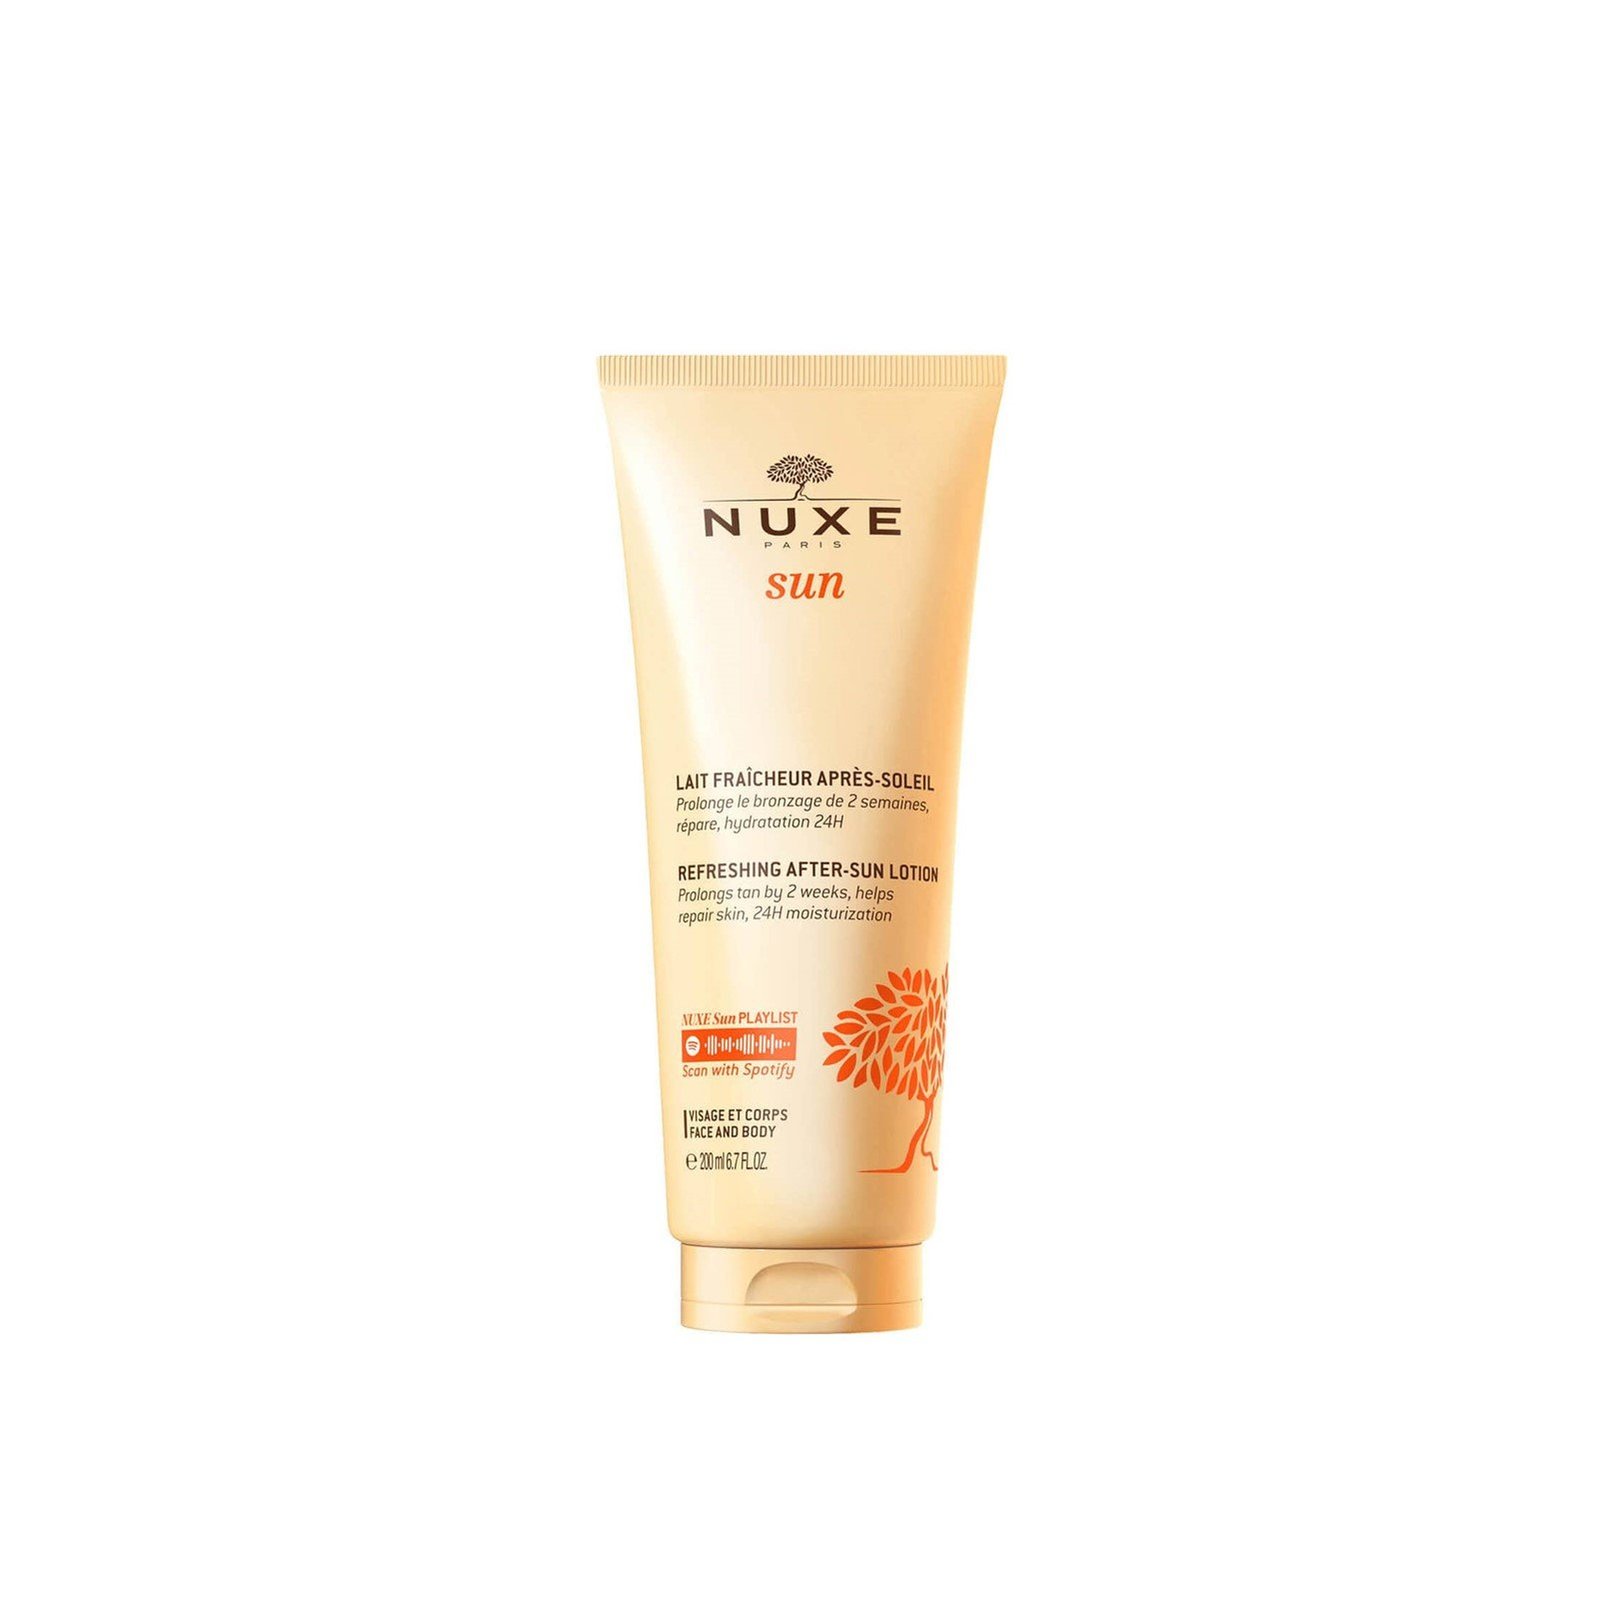 NUXE Sun Refreshing After-Sun Lotion for Face and Body 200ml (6.76fl oz)